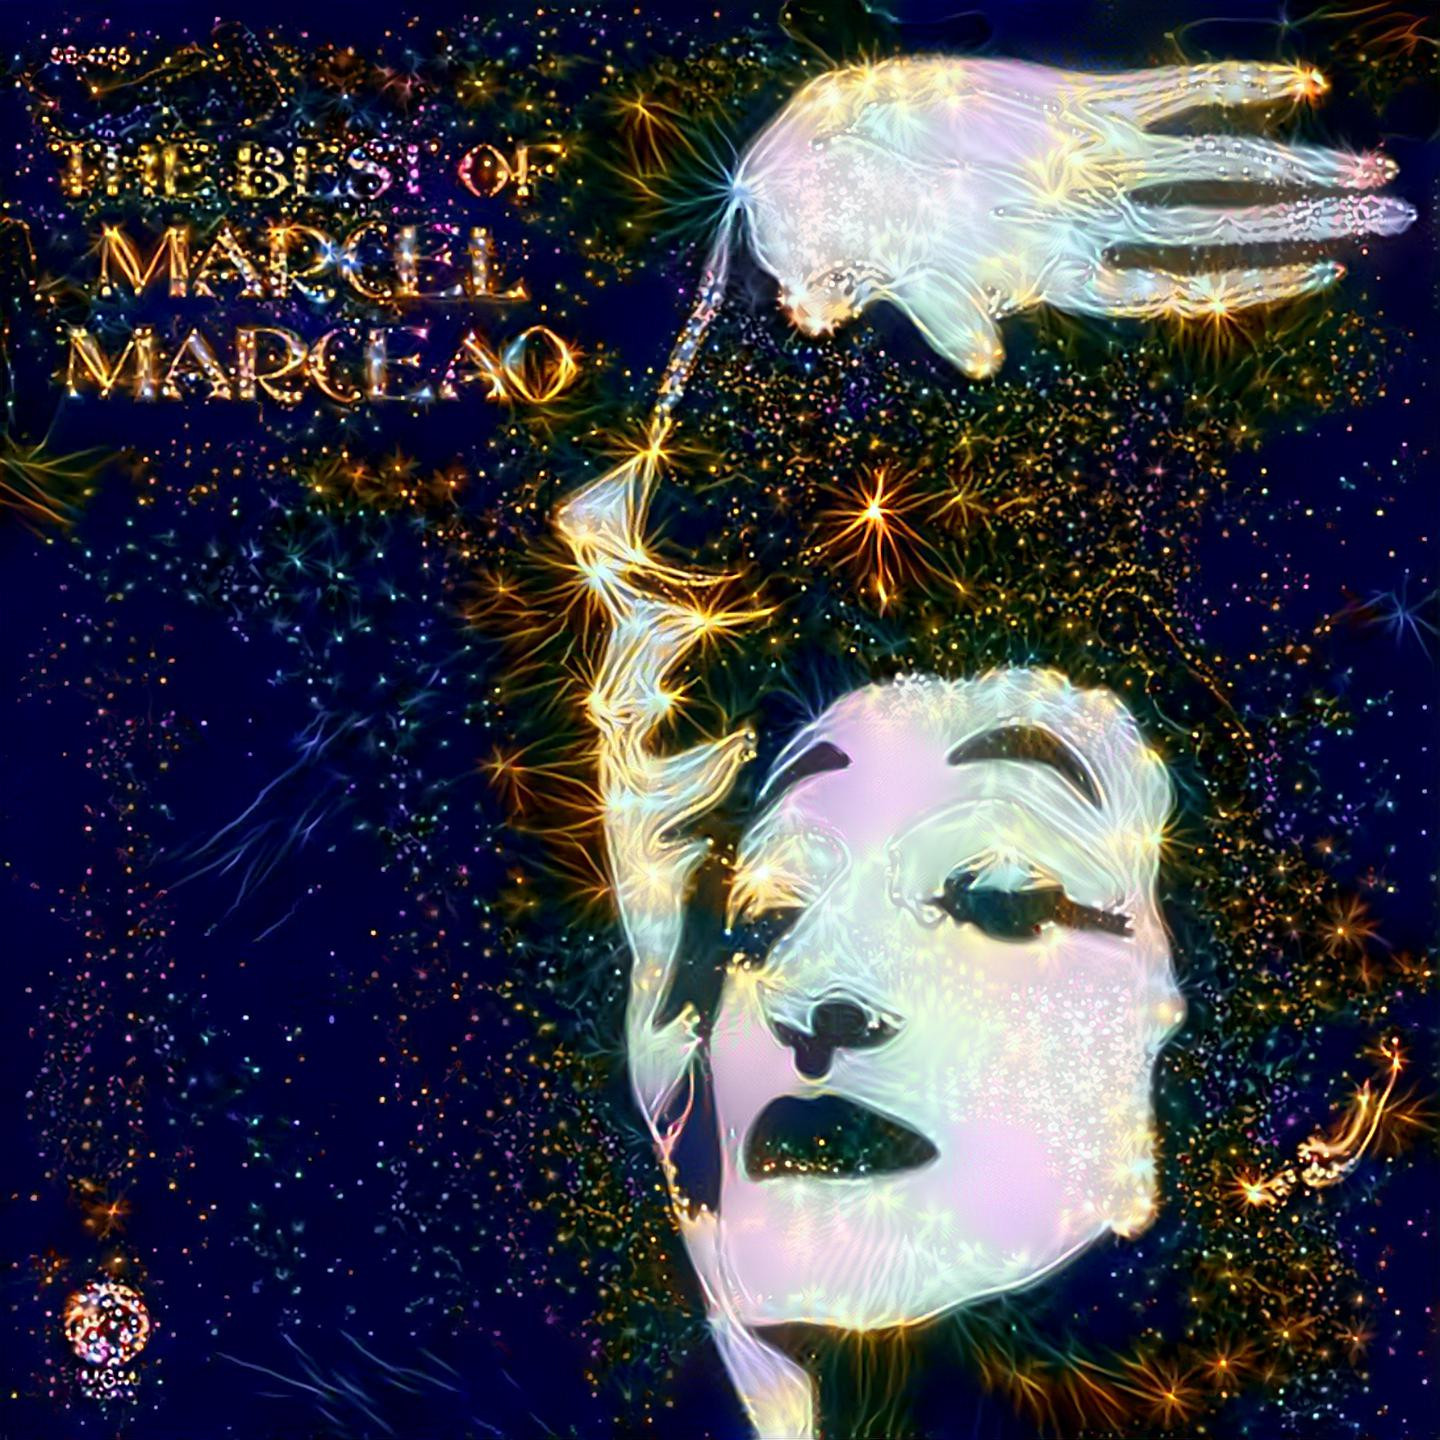 Deep Dream inspired by the great live album, The Best of Marcel Marceau! Applause to silence never sounded so good.